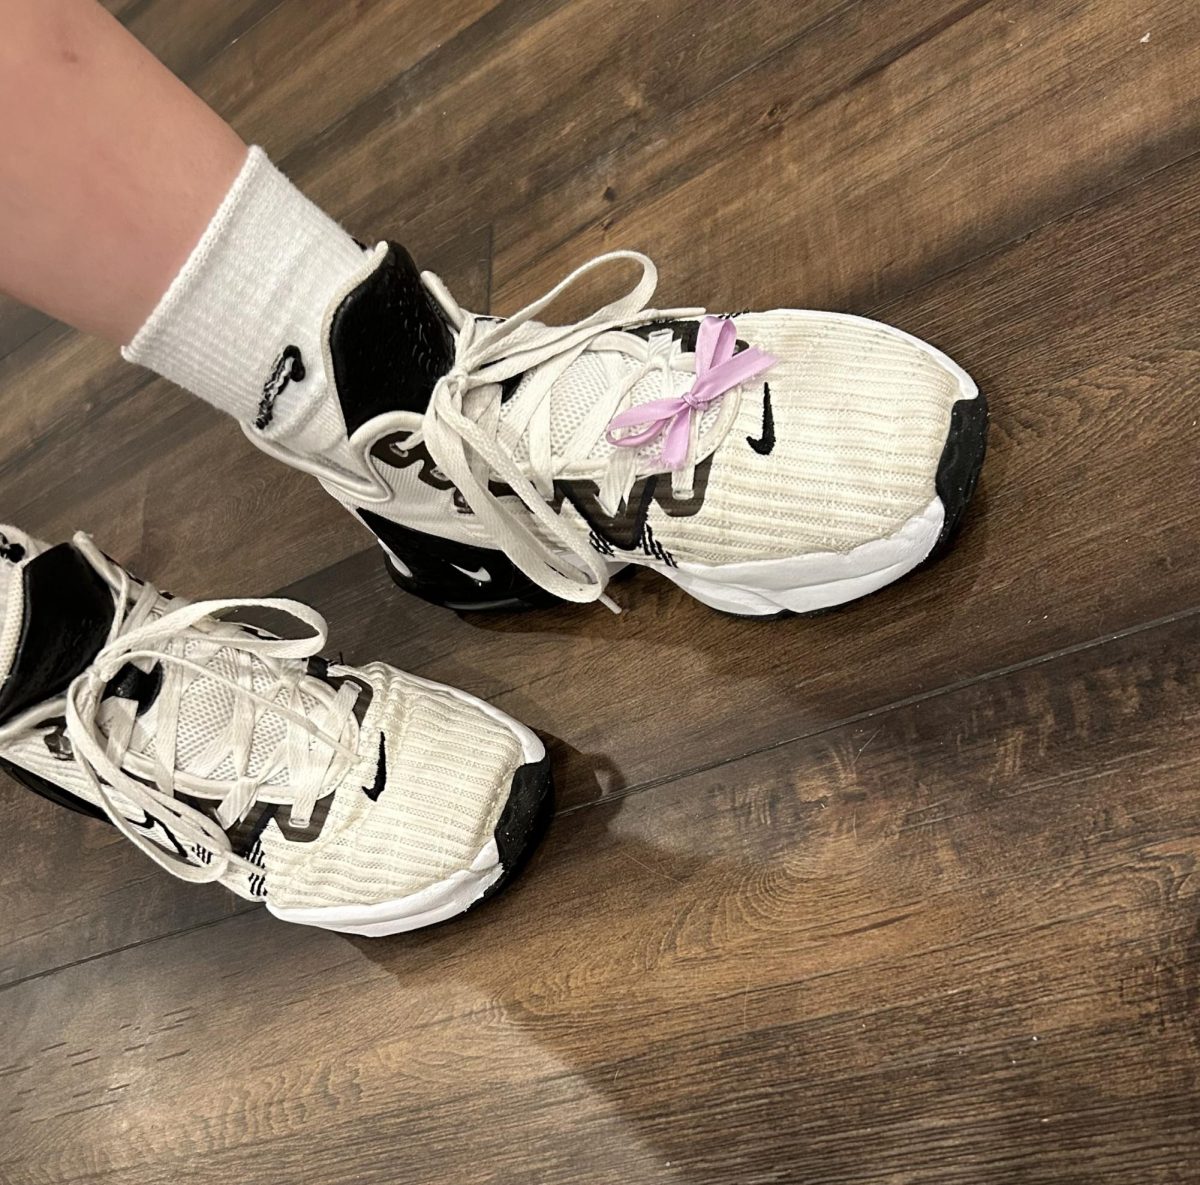 Claire+Schroder+wears+a+ribbon+on+her+volleyball+shoe+to+honor+her+dads+friend+that+died+from+pancreatic+cancer.+Many+people+wear+small+clothing+items+to+show+their+support+daily.